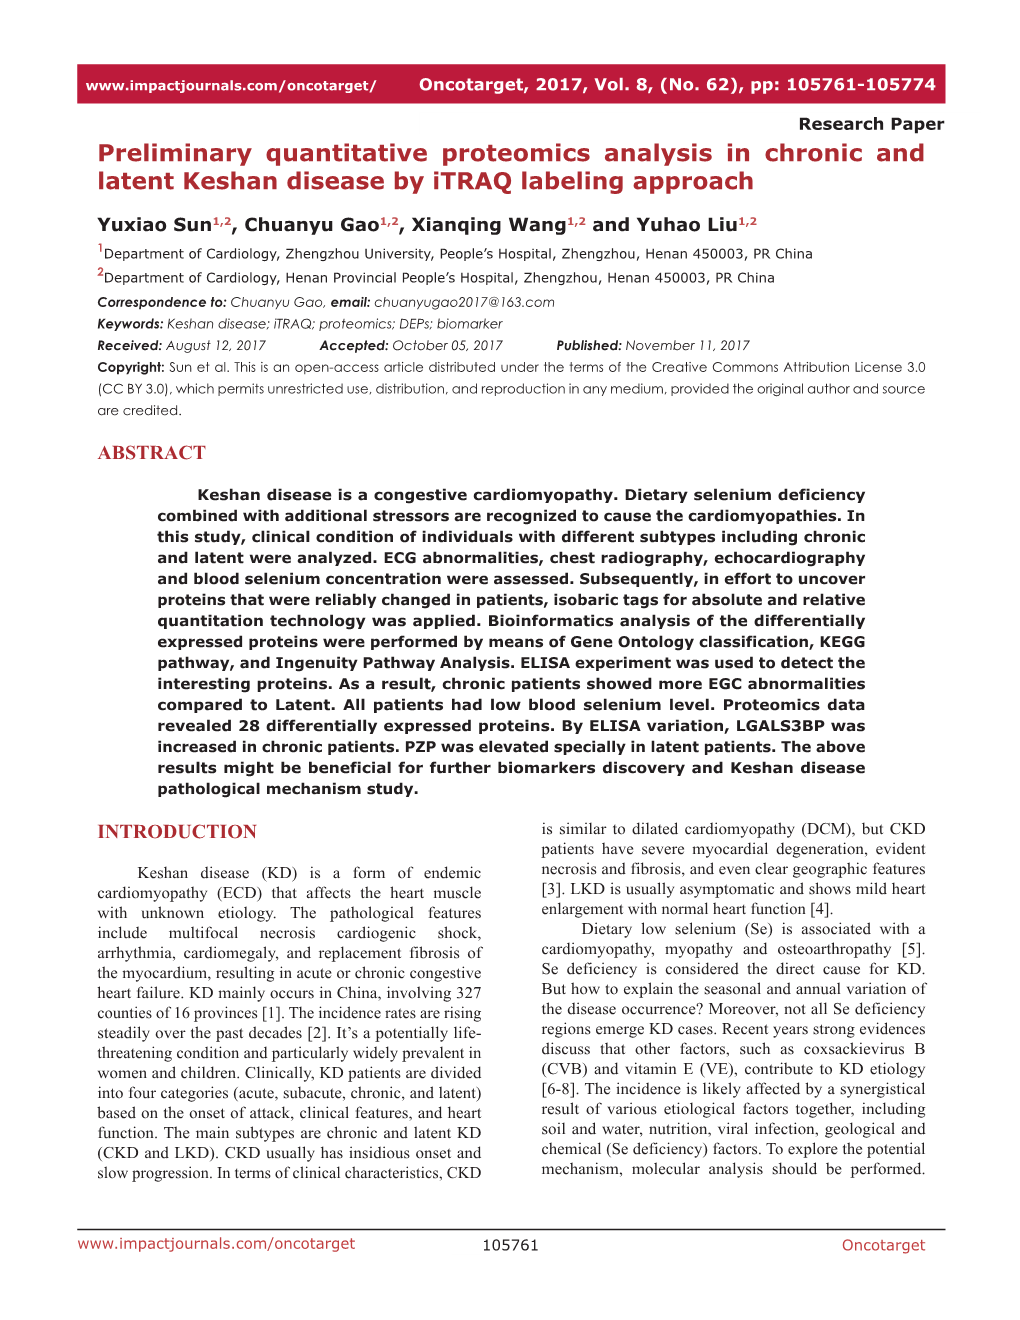 Preliminary Quantitative Proteomics Analysis in Chronic and Latent Keshan Disease by Itraq Labeling Approach